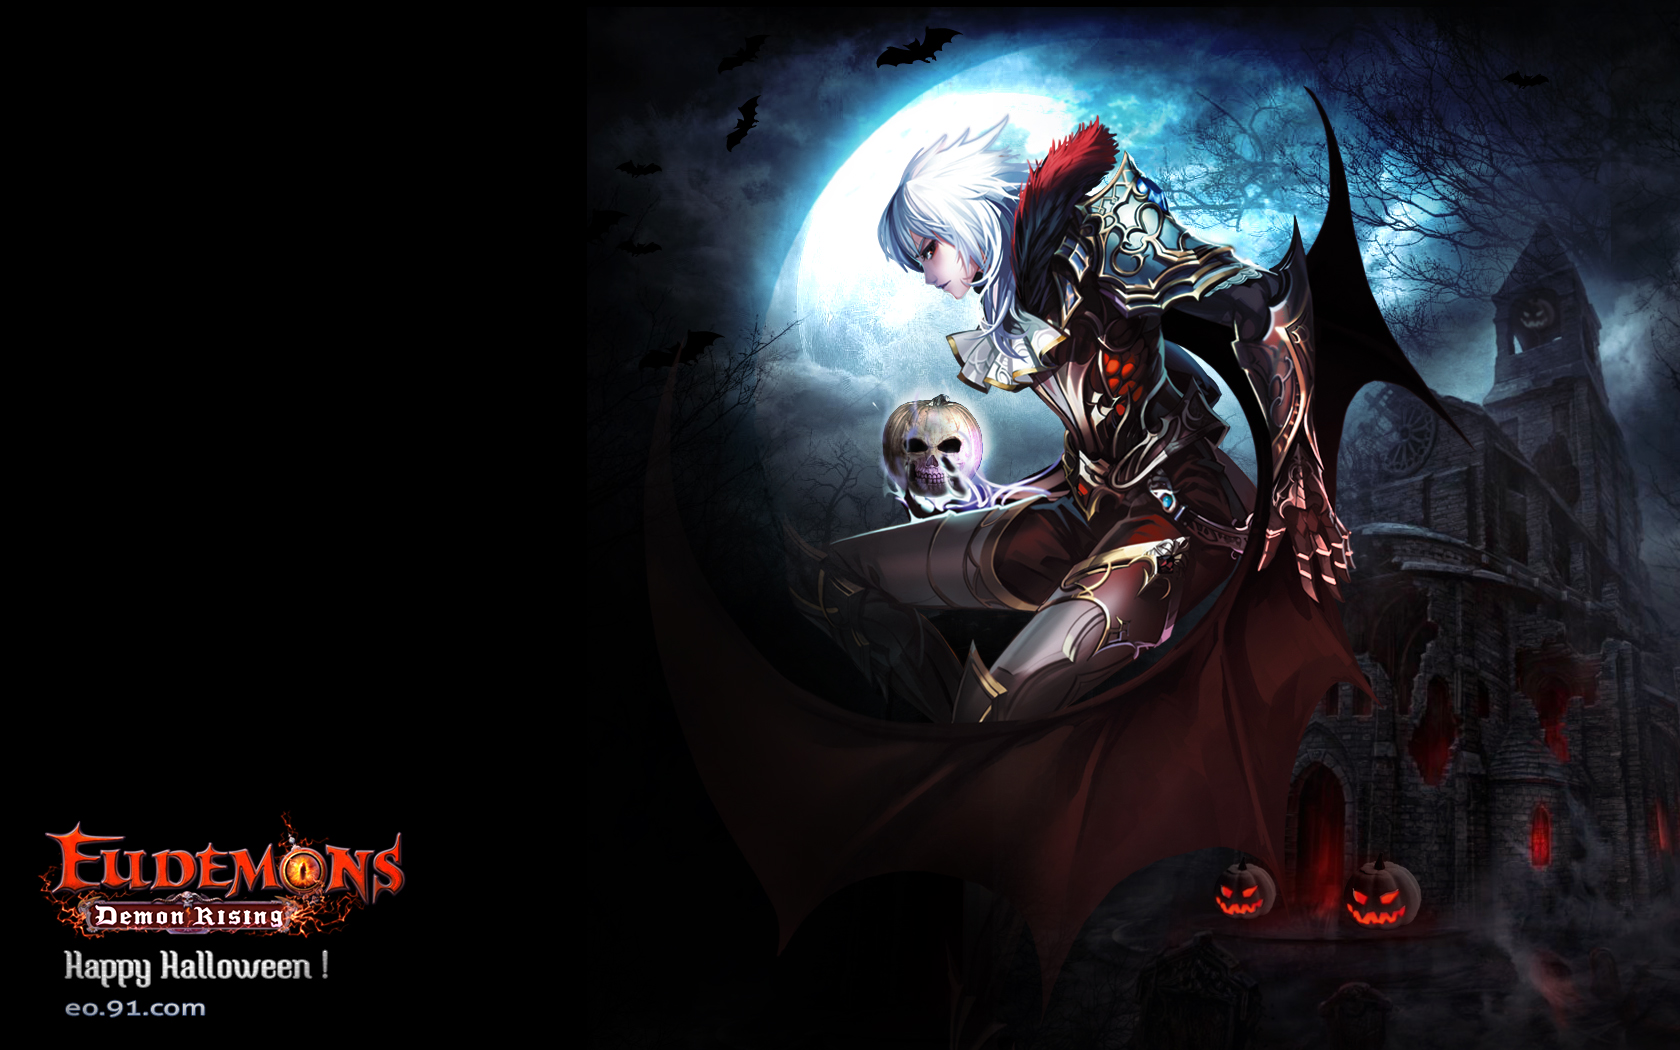 Video Game Eudemons Online 1680x1050